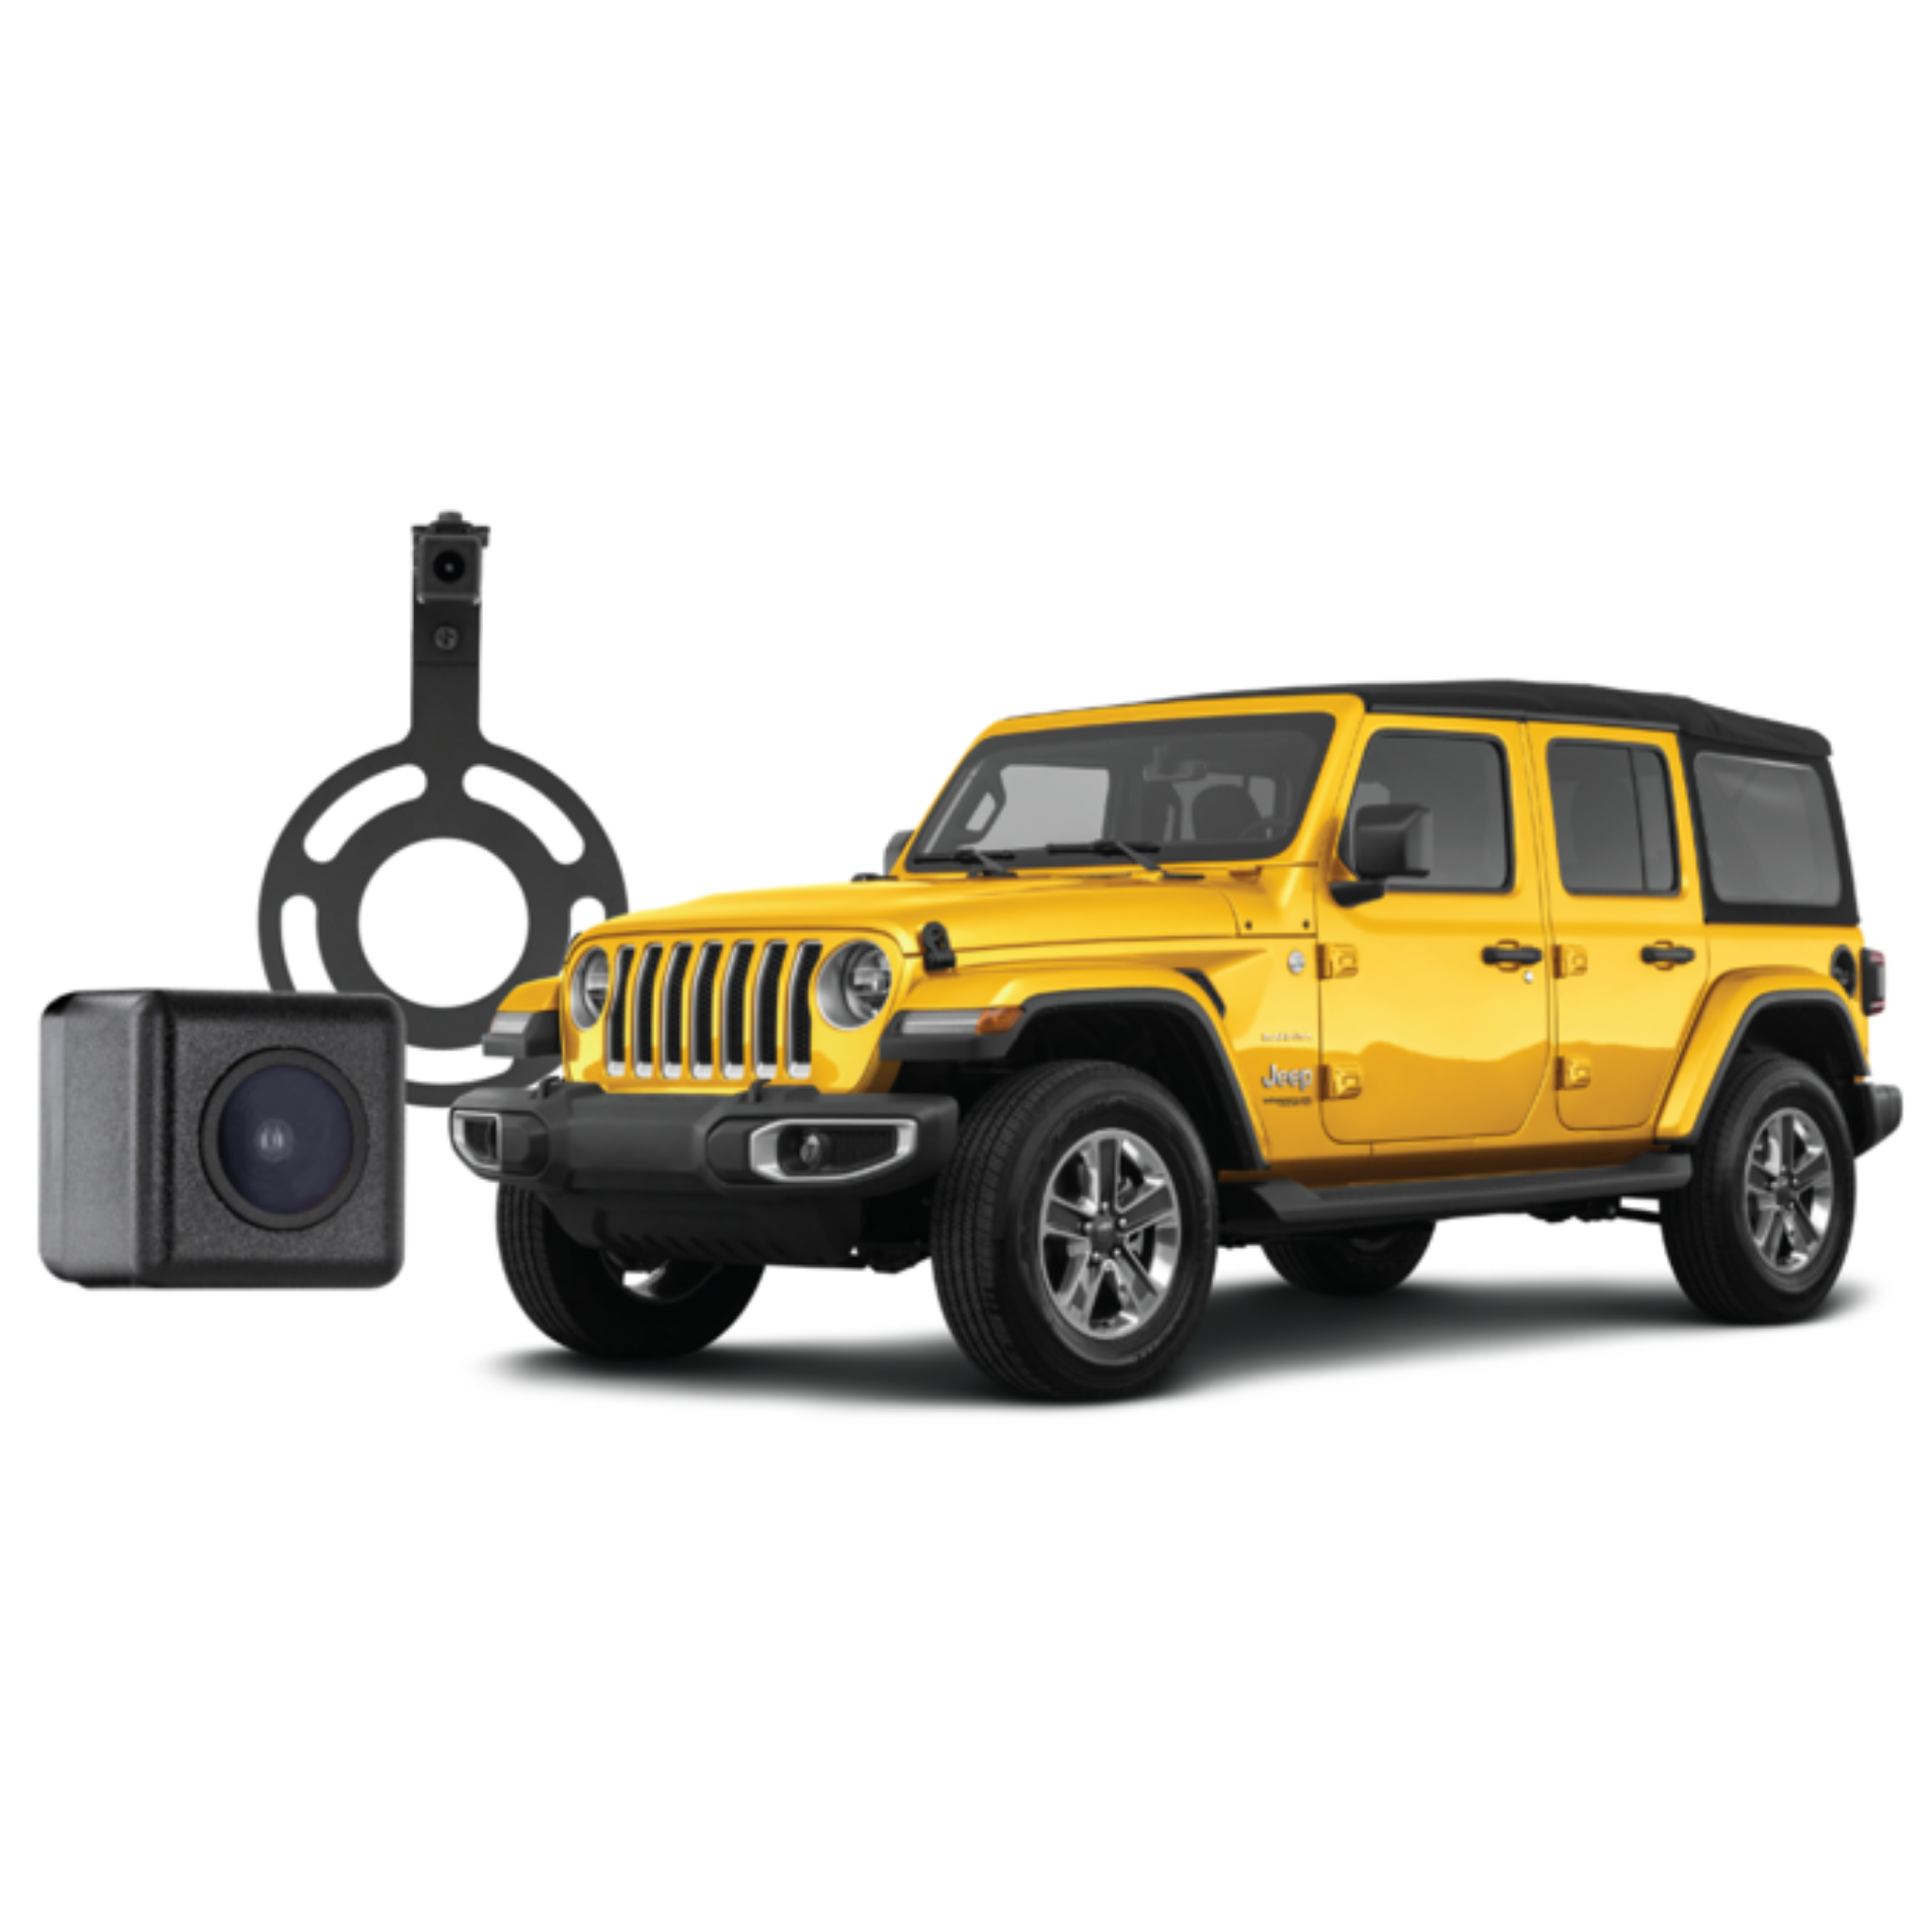 Jeep Wrangler JK (2007-2018) Backup Camera with Spare Tire Mount and Static Parking Lines